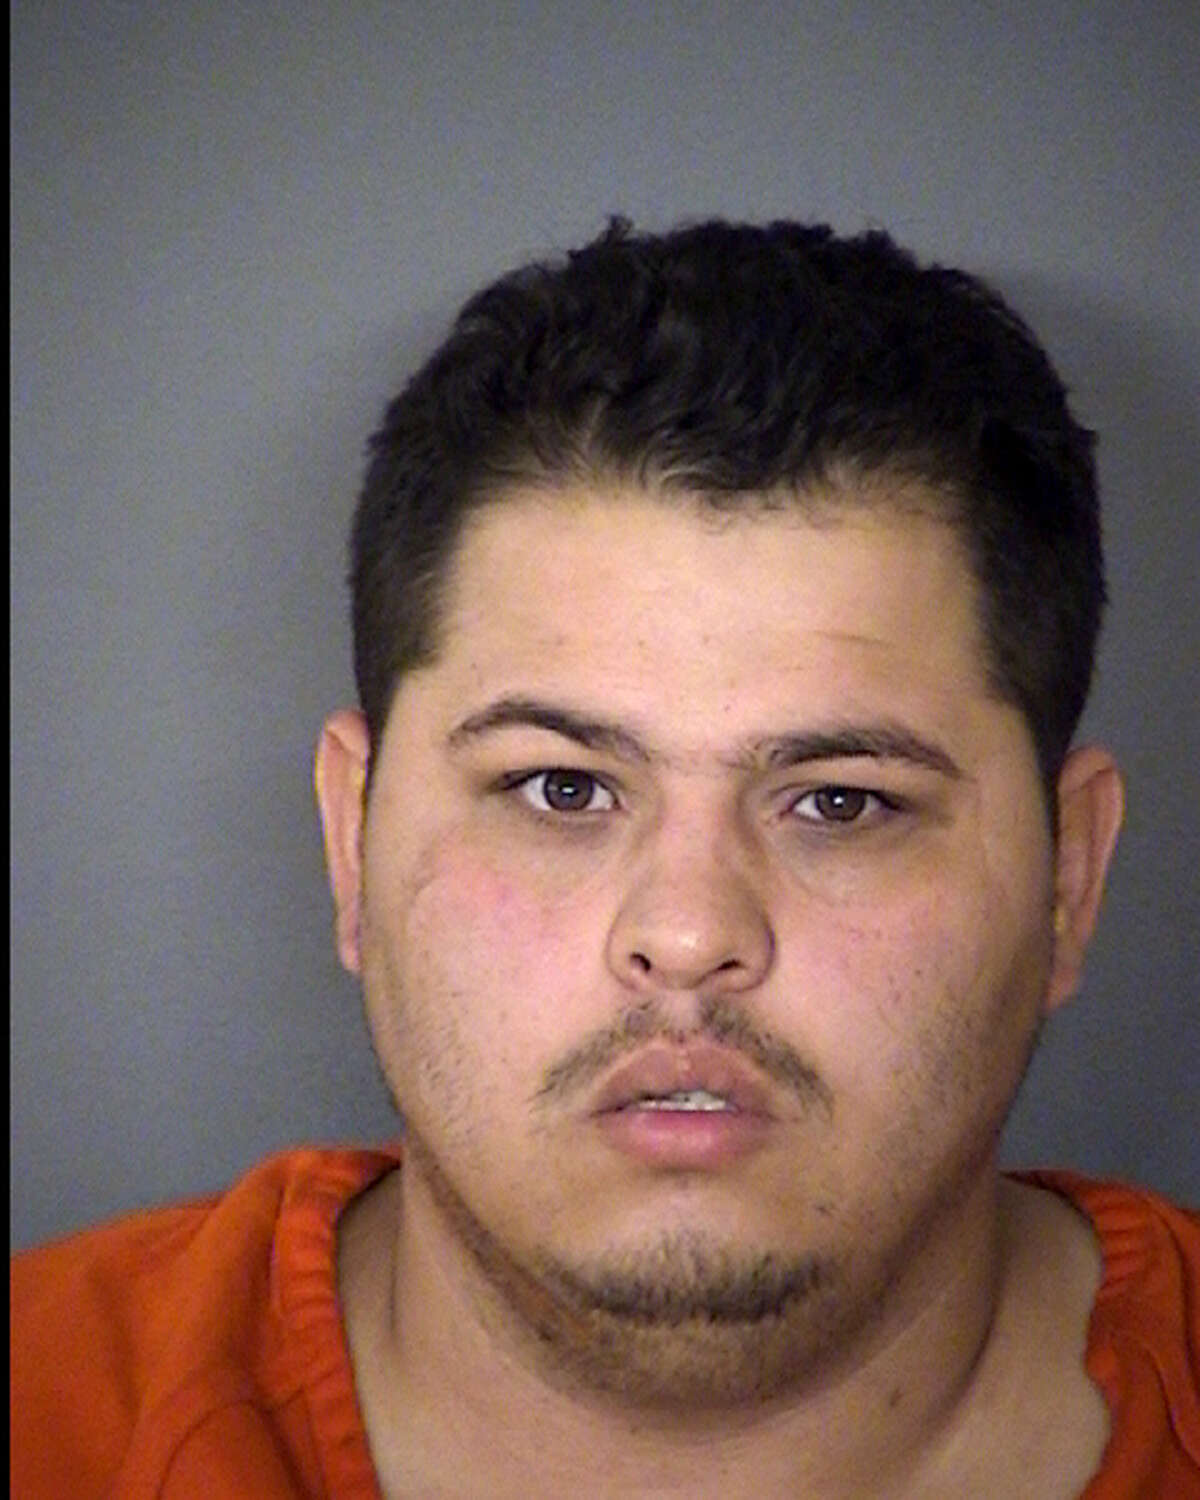 Rogelio Archuleta, arrested on three charges of causing serious bodily injury to a child -- his niece and two nephews. He was sentenced Tuesday, March 1, 2016 to 35 years in prison.